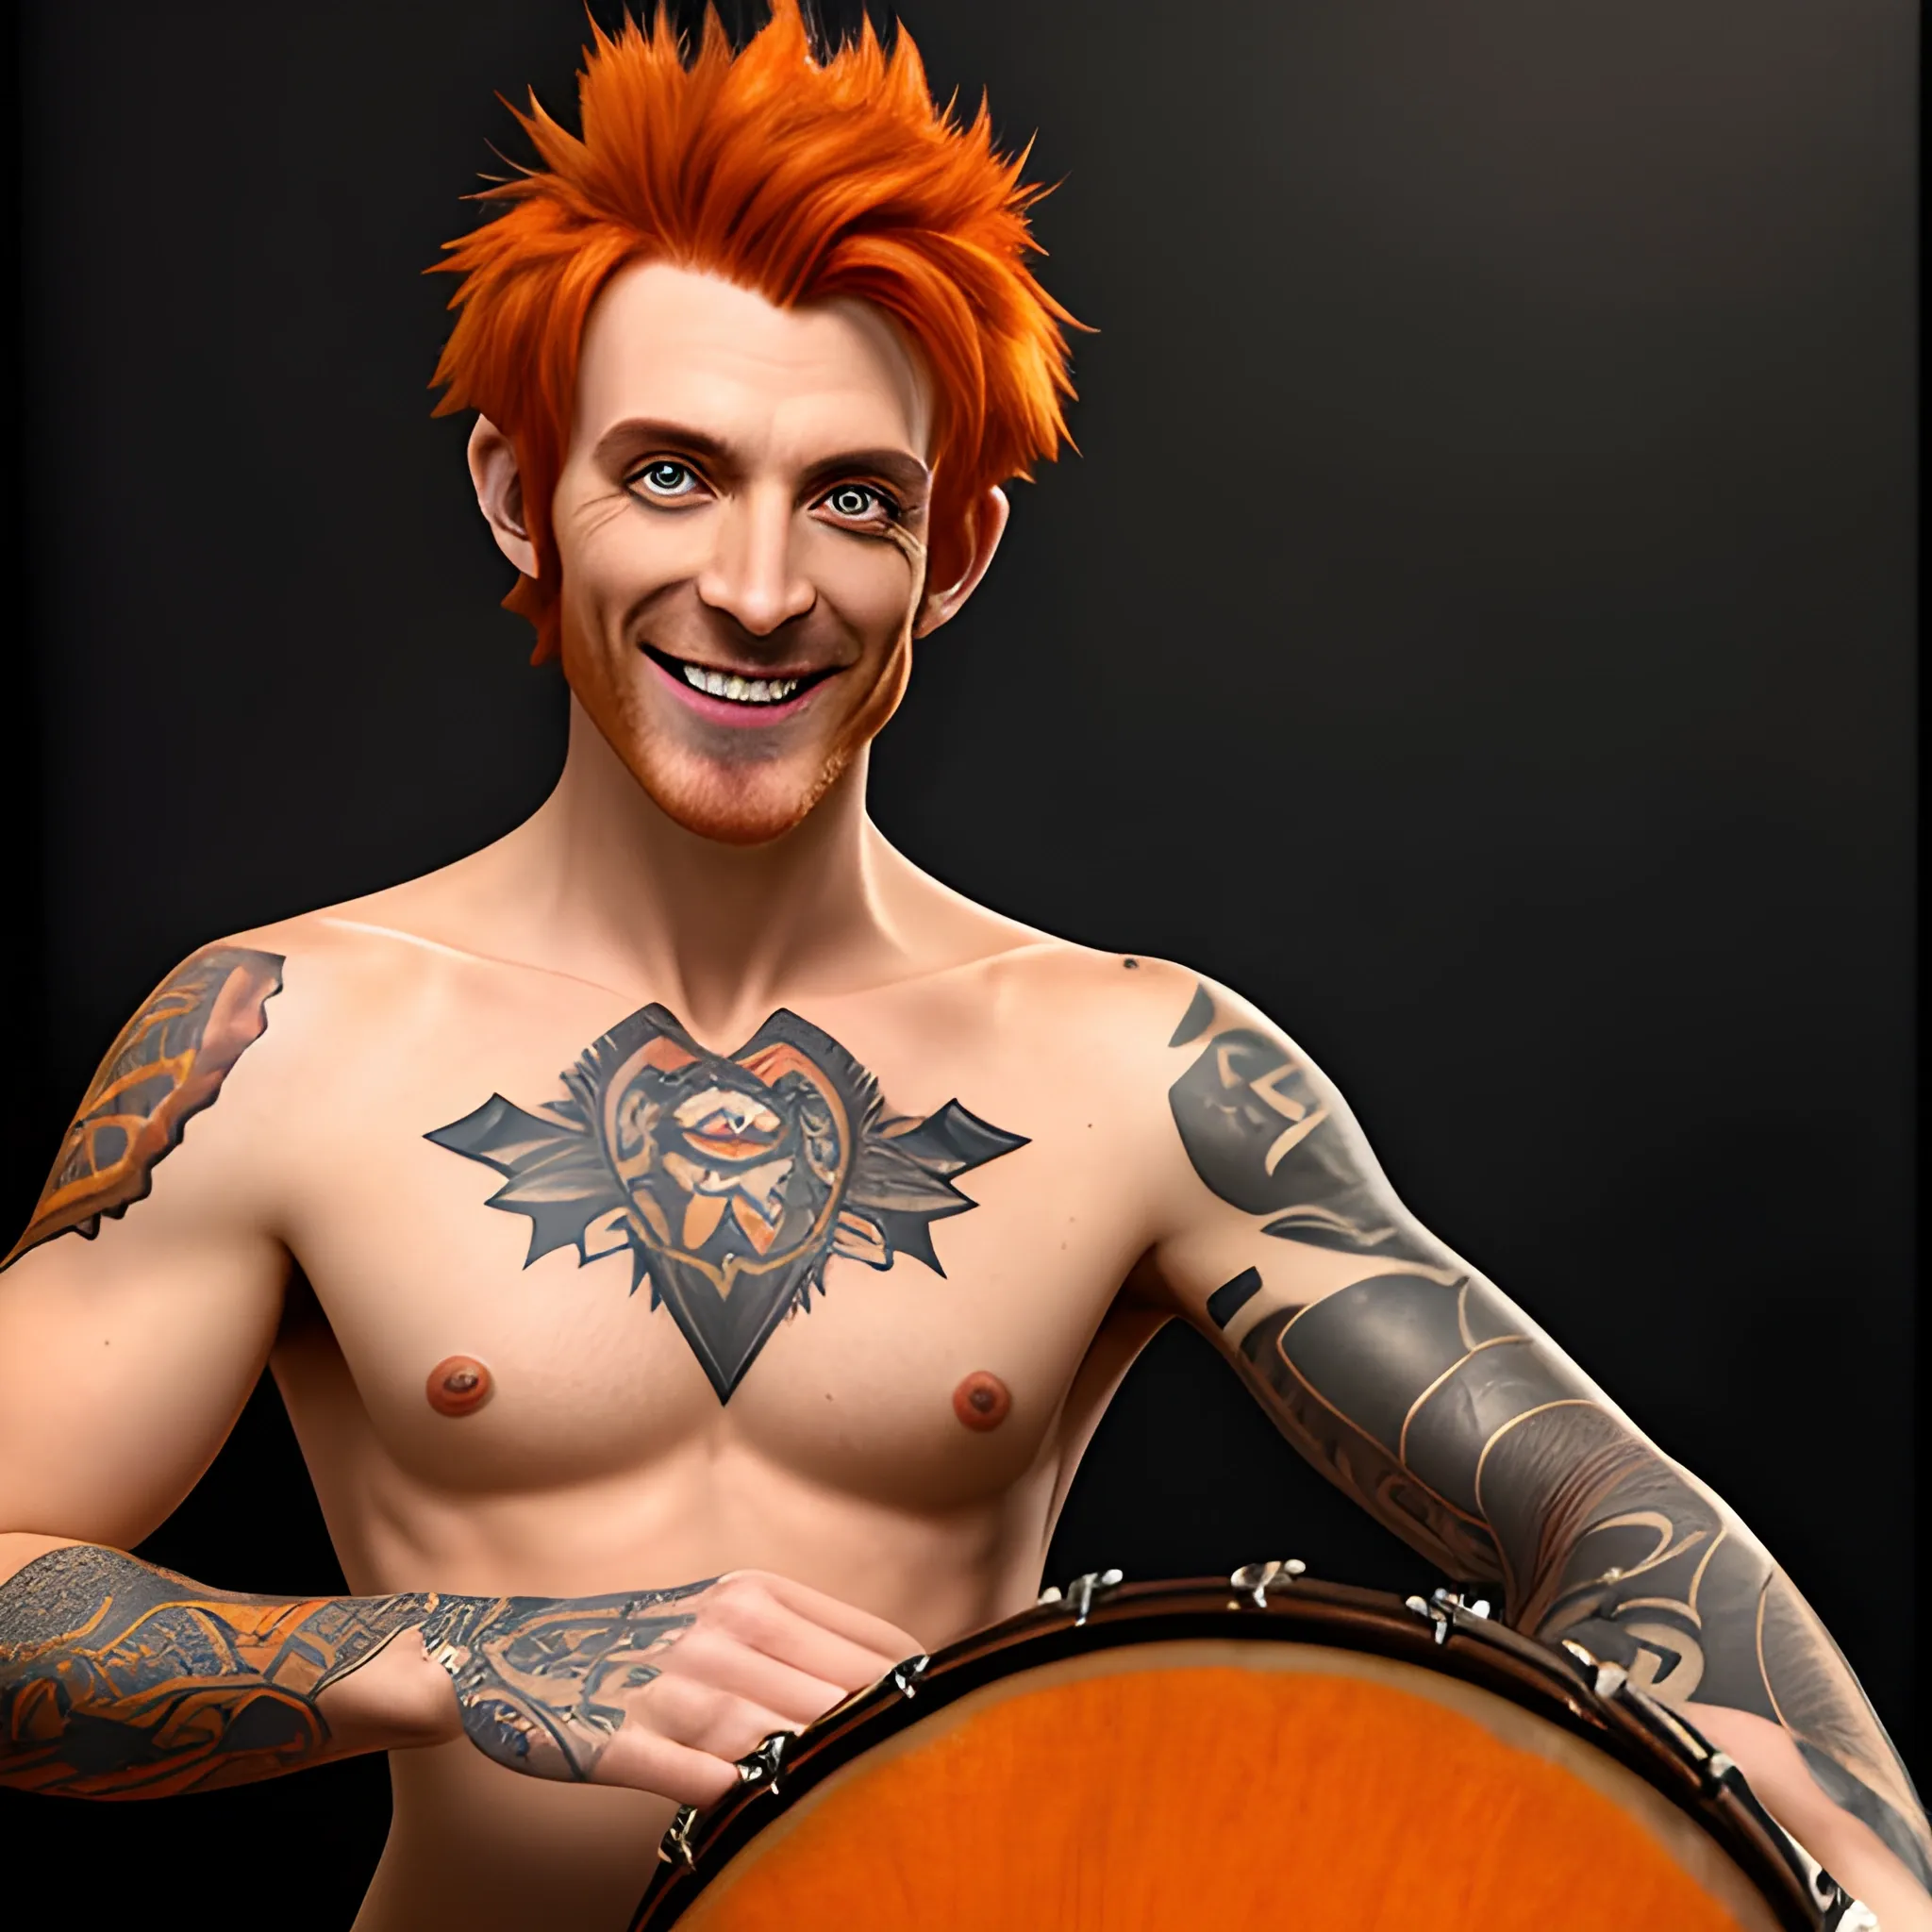 DnD  thin skinny baby face young halfling male short haired dark orange ginger with a chest tatoo smiling with a mugshot expression and playing a drum